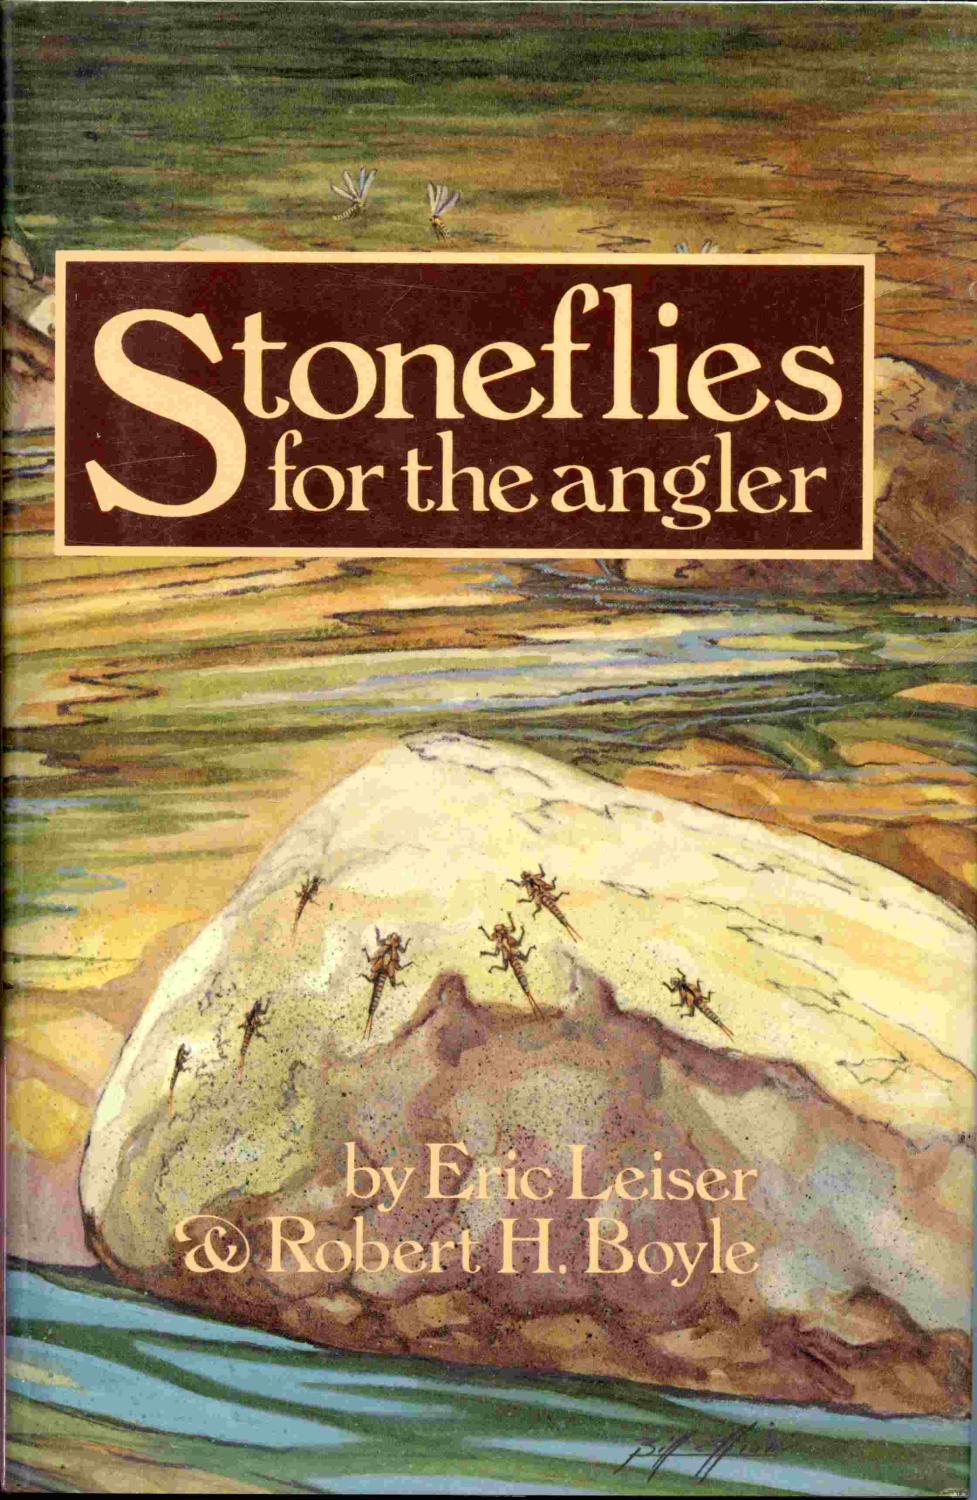 Stoneflies For The Angler: How To Know Them, Tie Them, And Fish Them. - Leiser, Eric & Robert H. Boyle